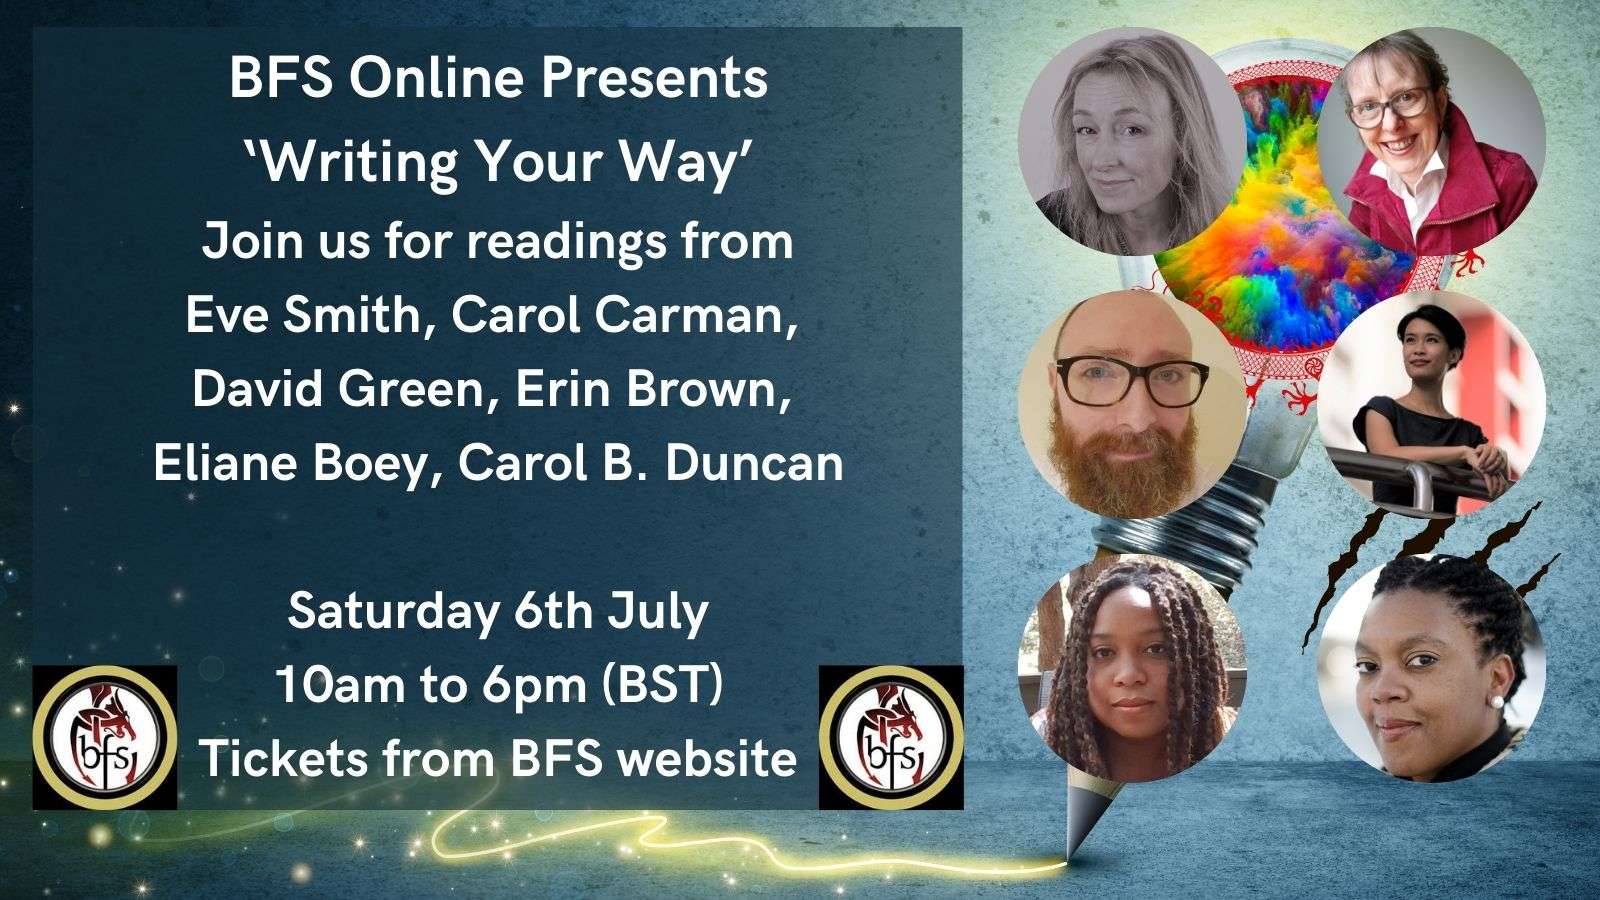 BFS Online: Writing Your Way – Readings